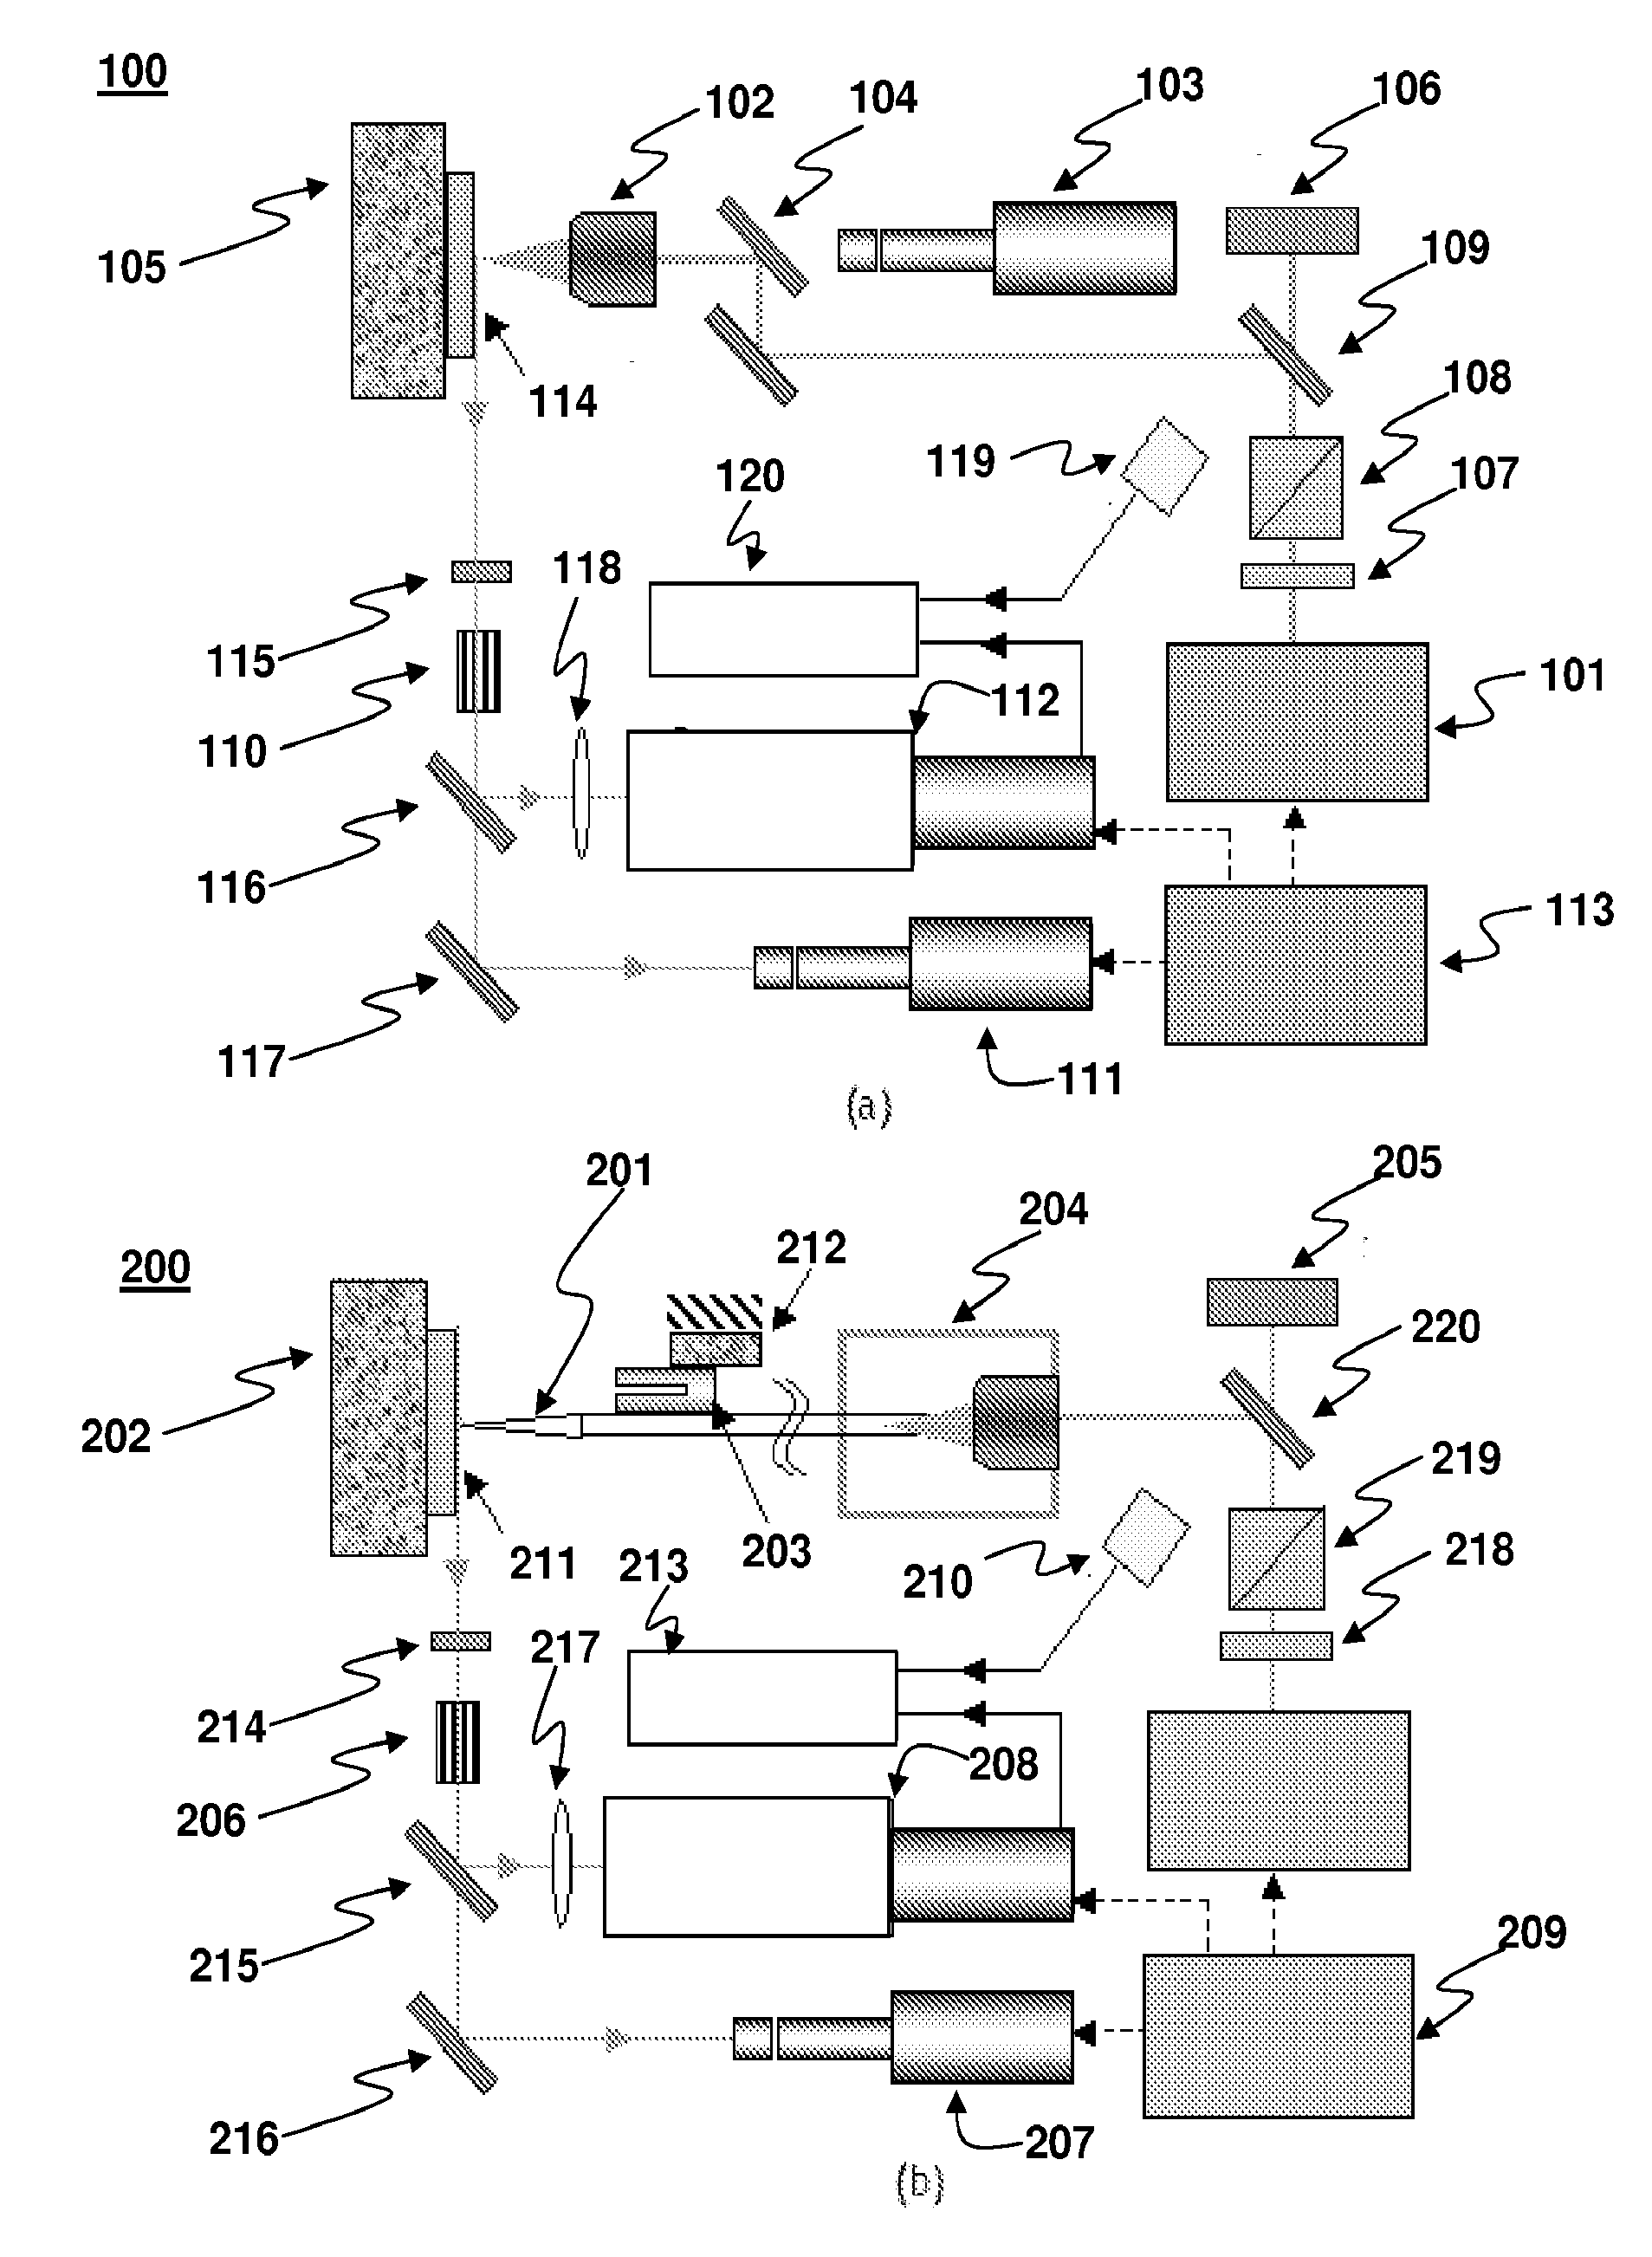 High-Resolution Laser Induced Breakdown Spectroscopy Devices and Methods